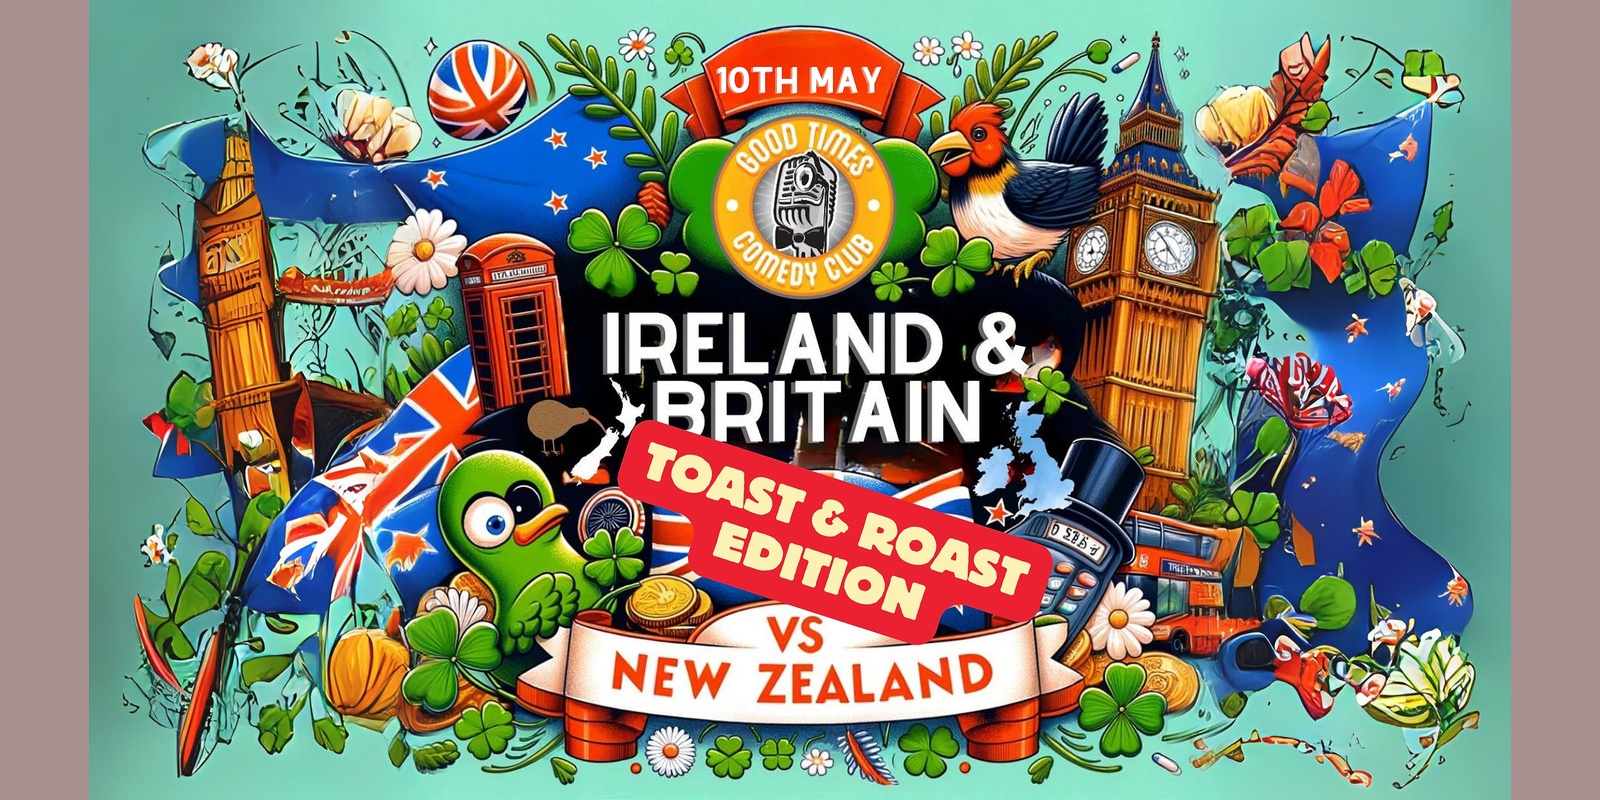 Banner image for Ireland and Britain v's New Zealand "Roast and Toast" edition - A comedy Debate